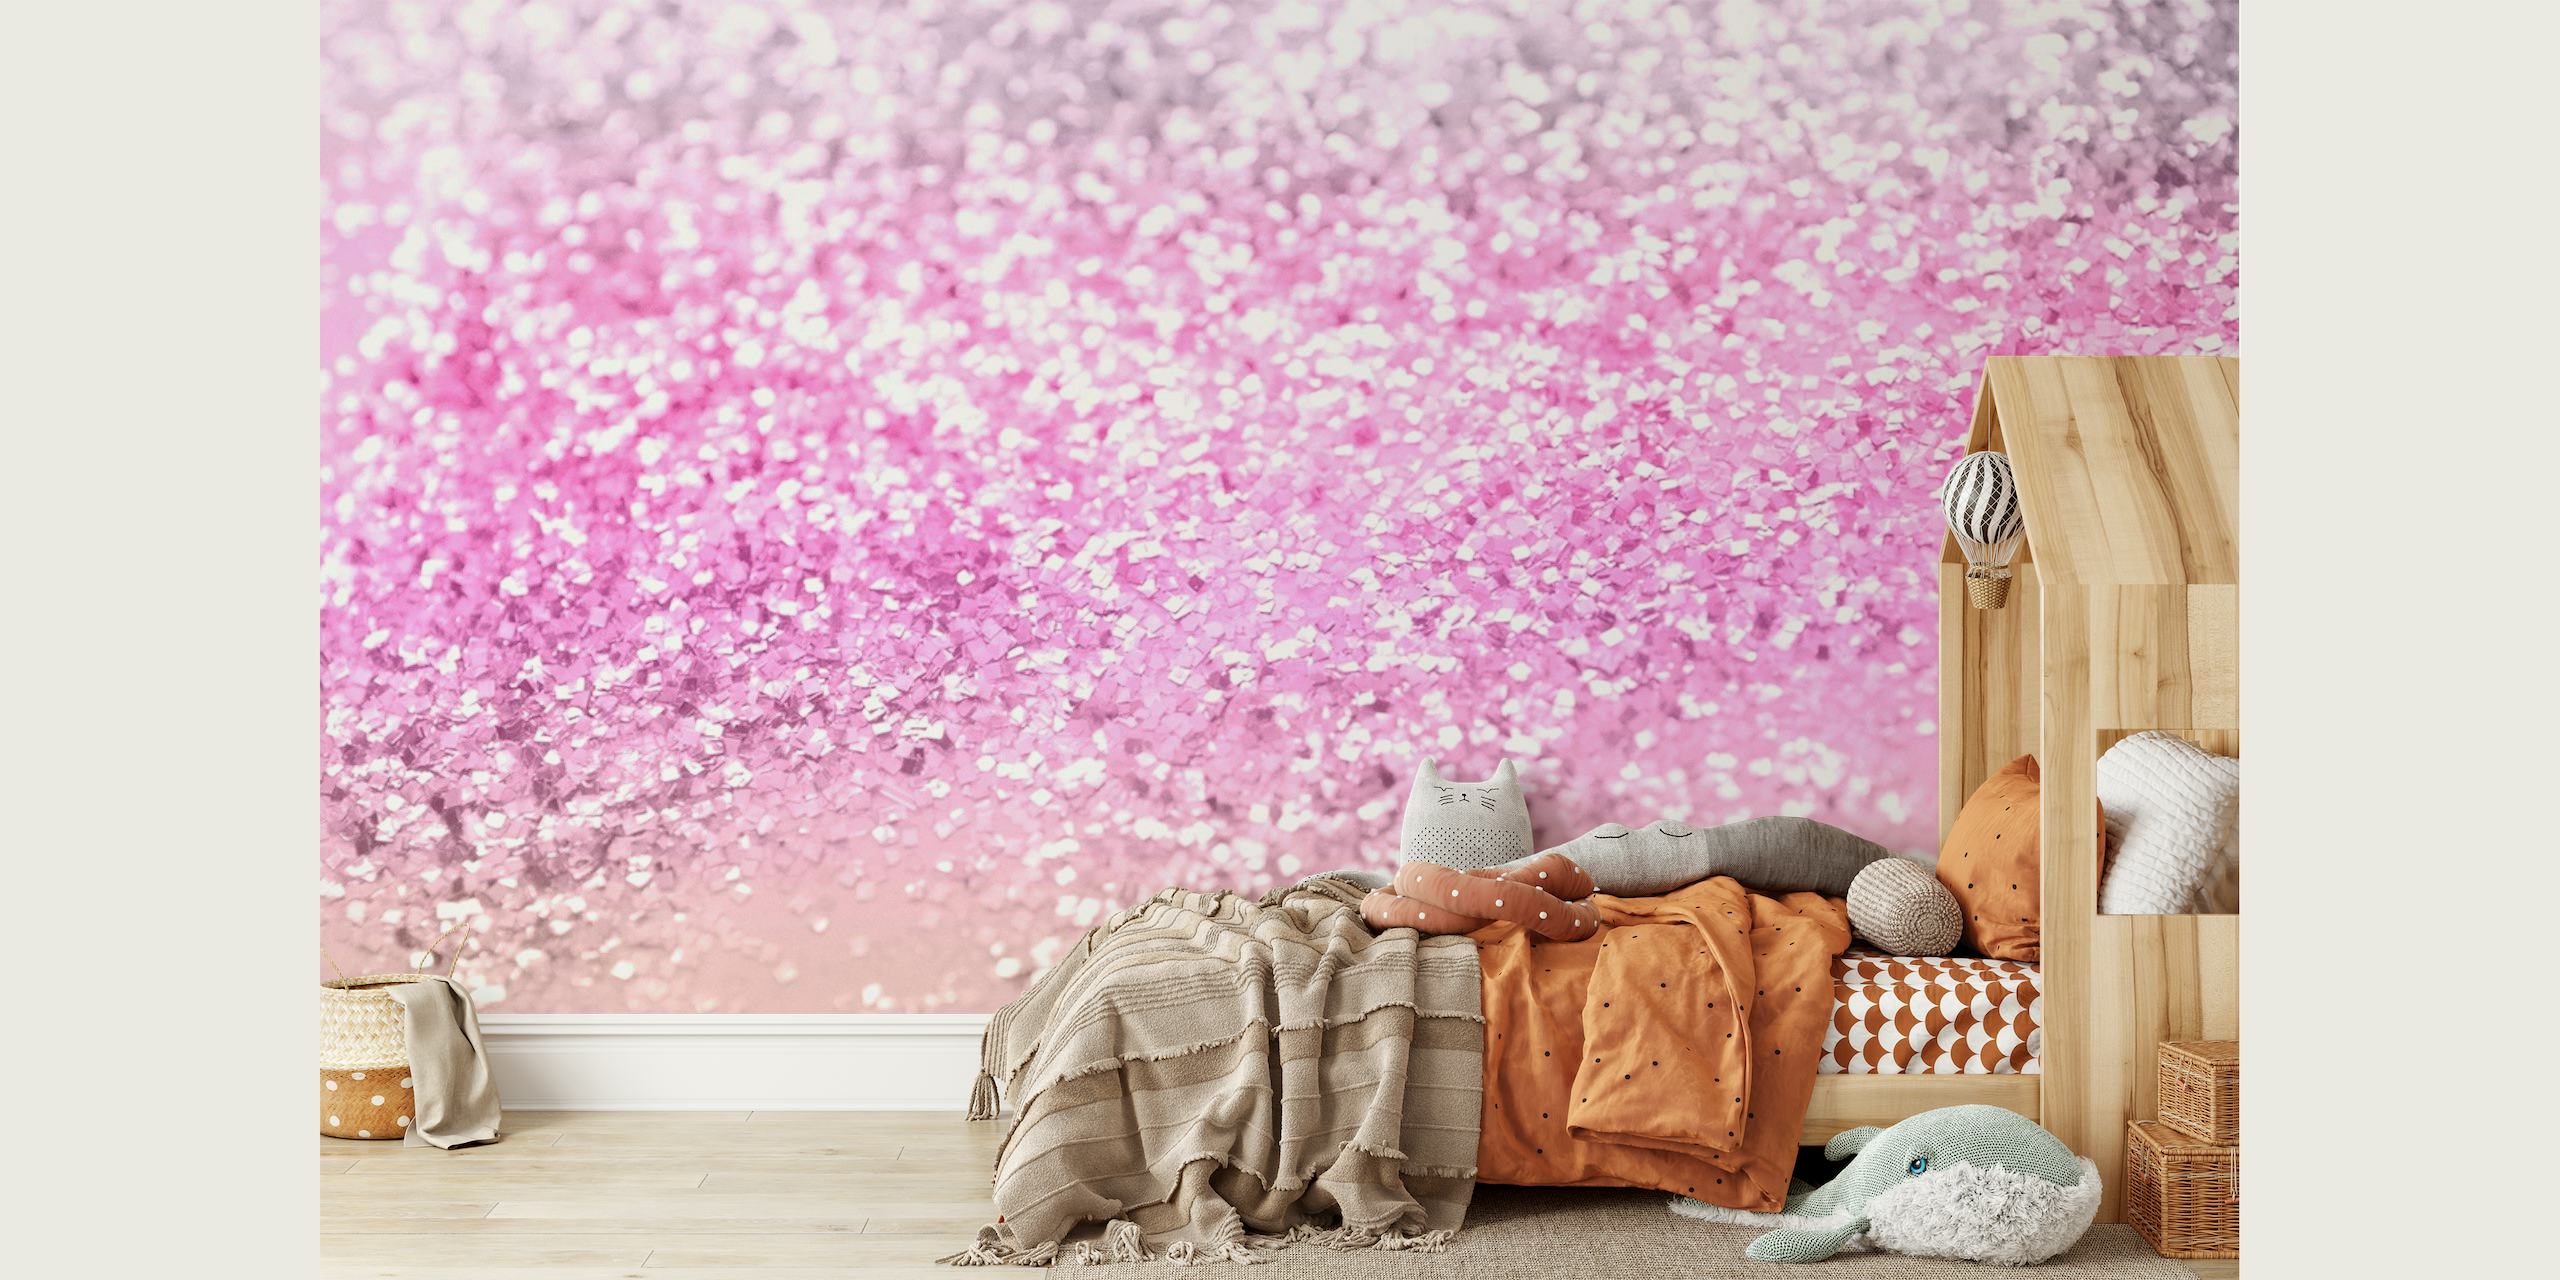 Glitter gradient wall mural in pink and silver for a magical room theme